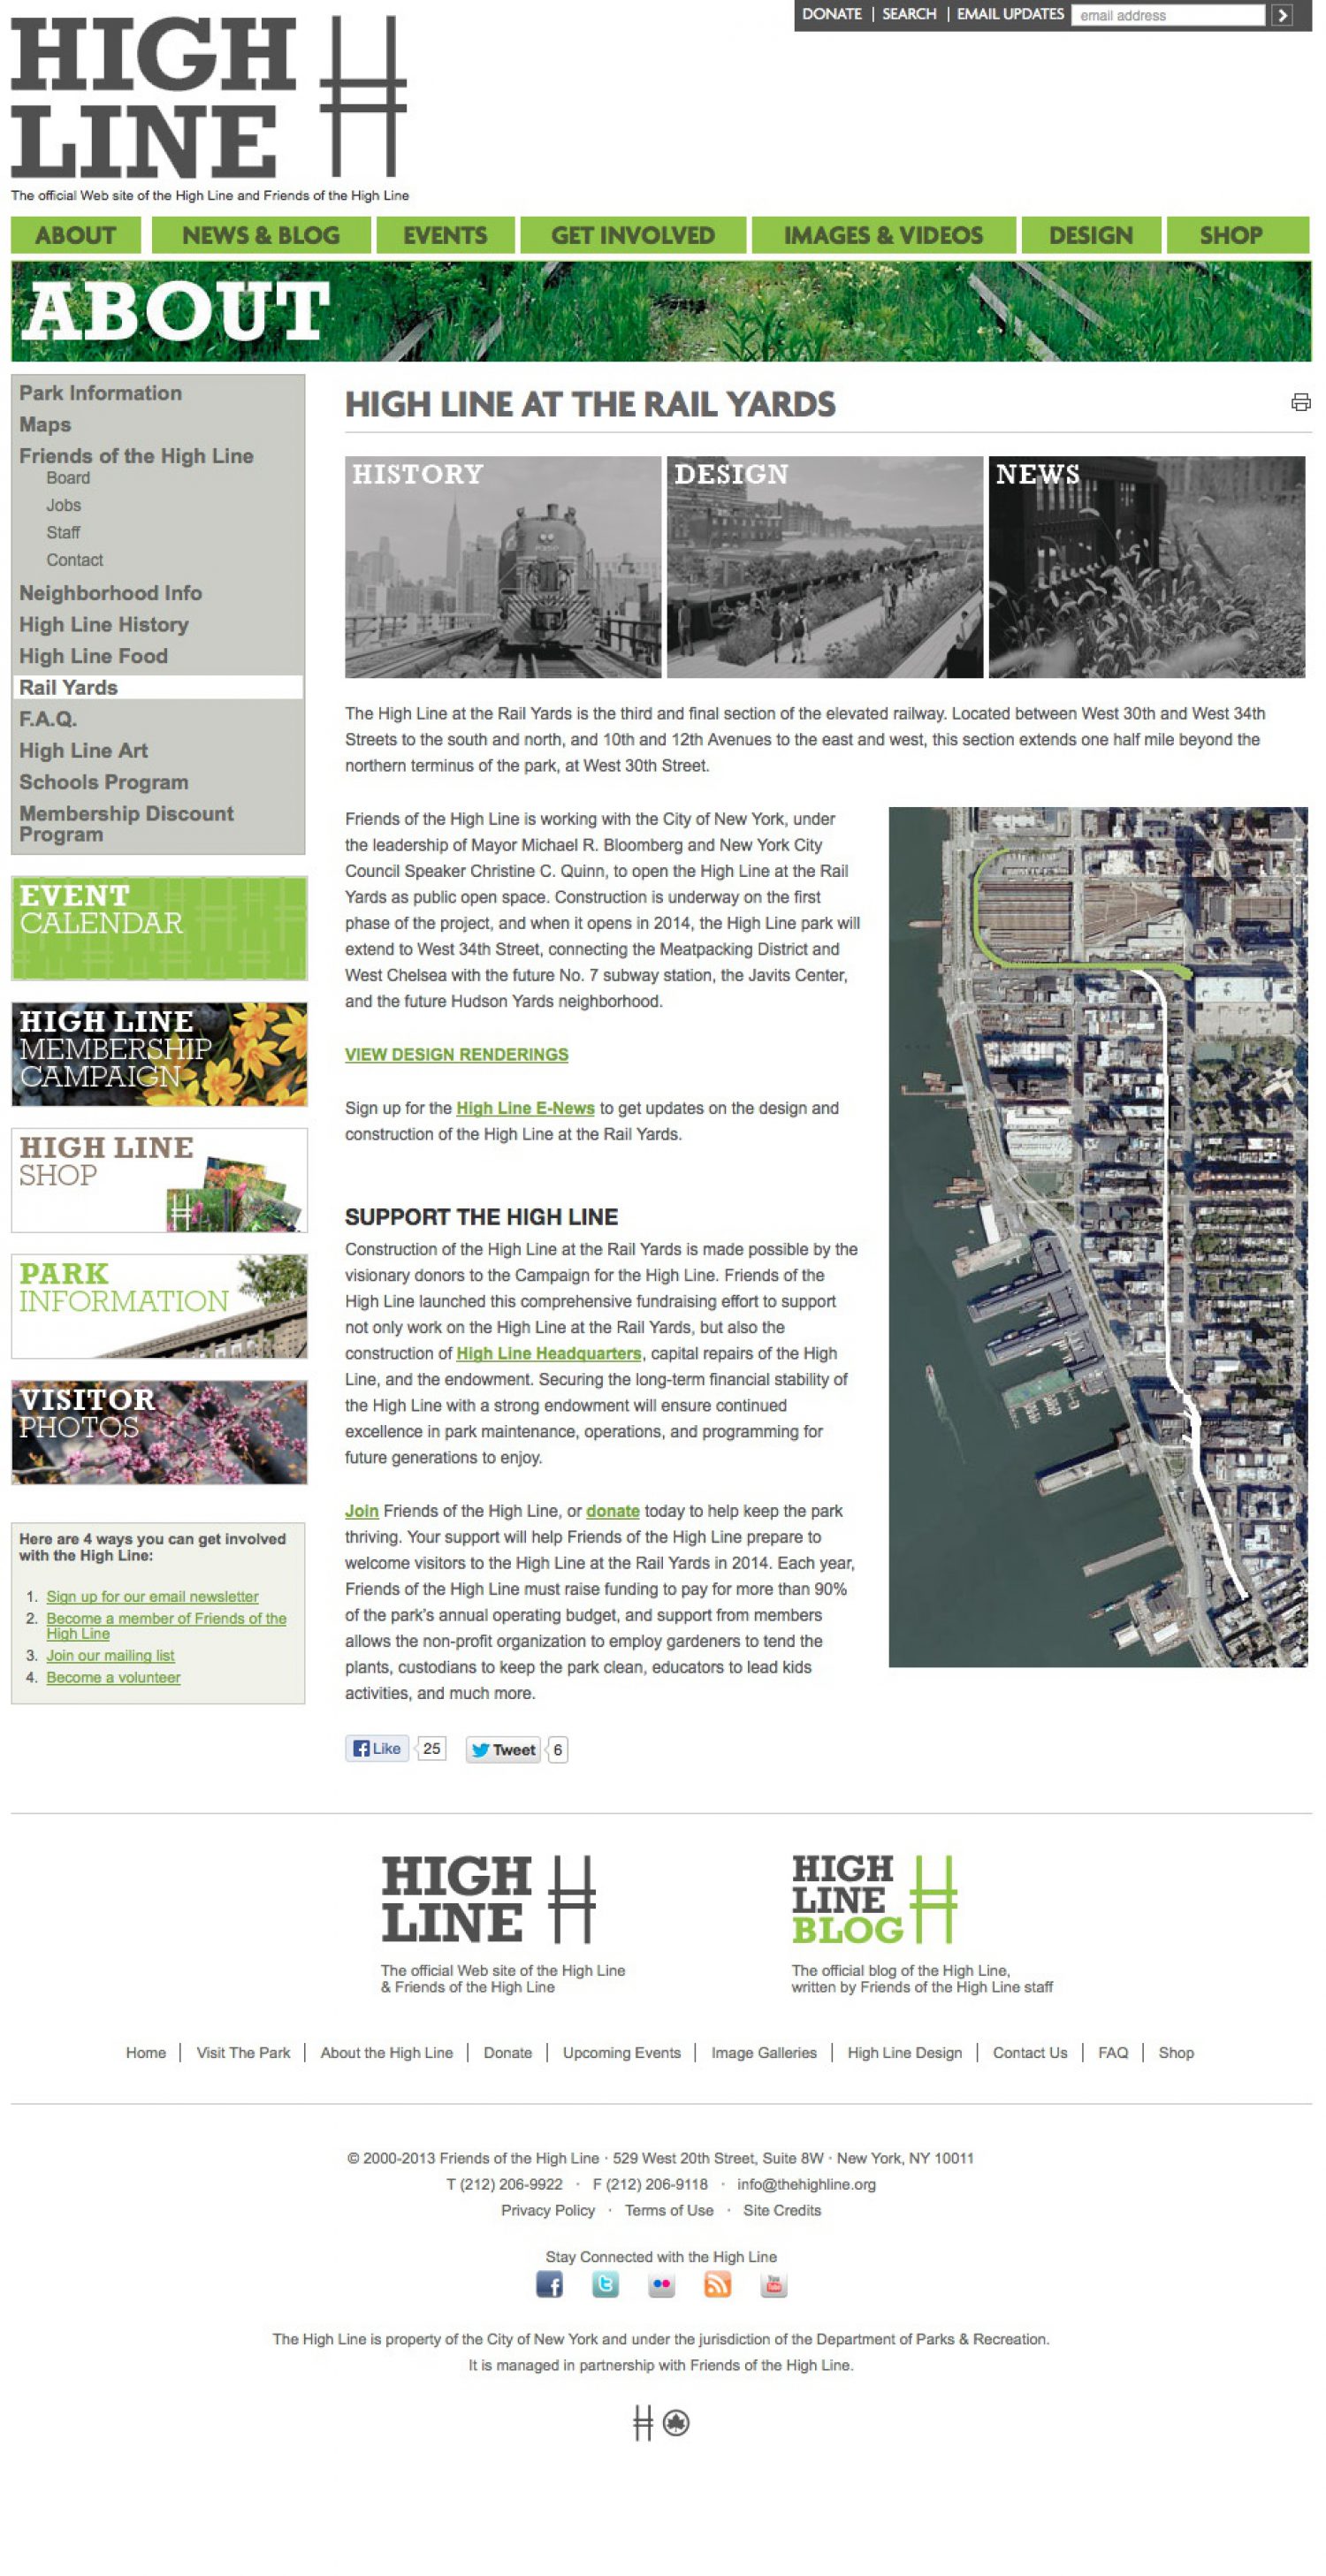 Screenshot of the High Line website's about page